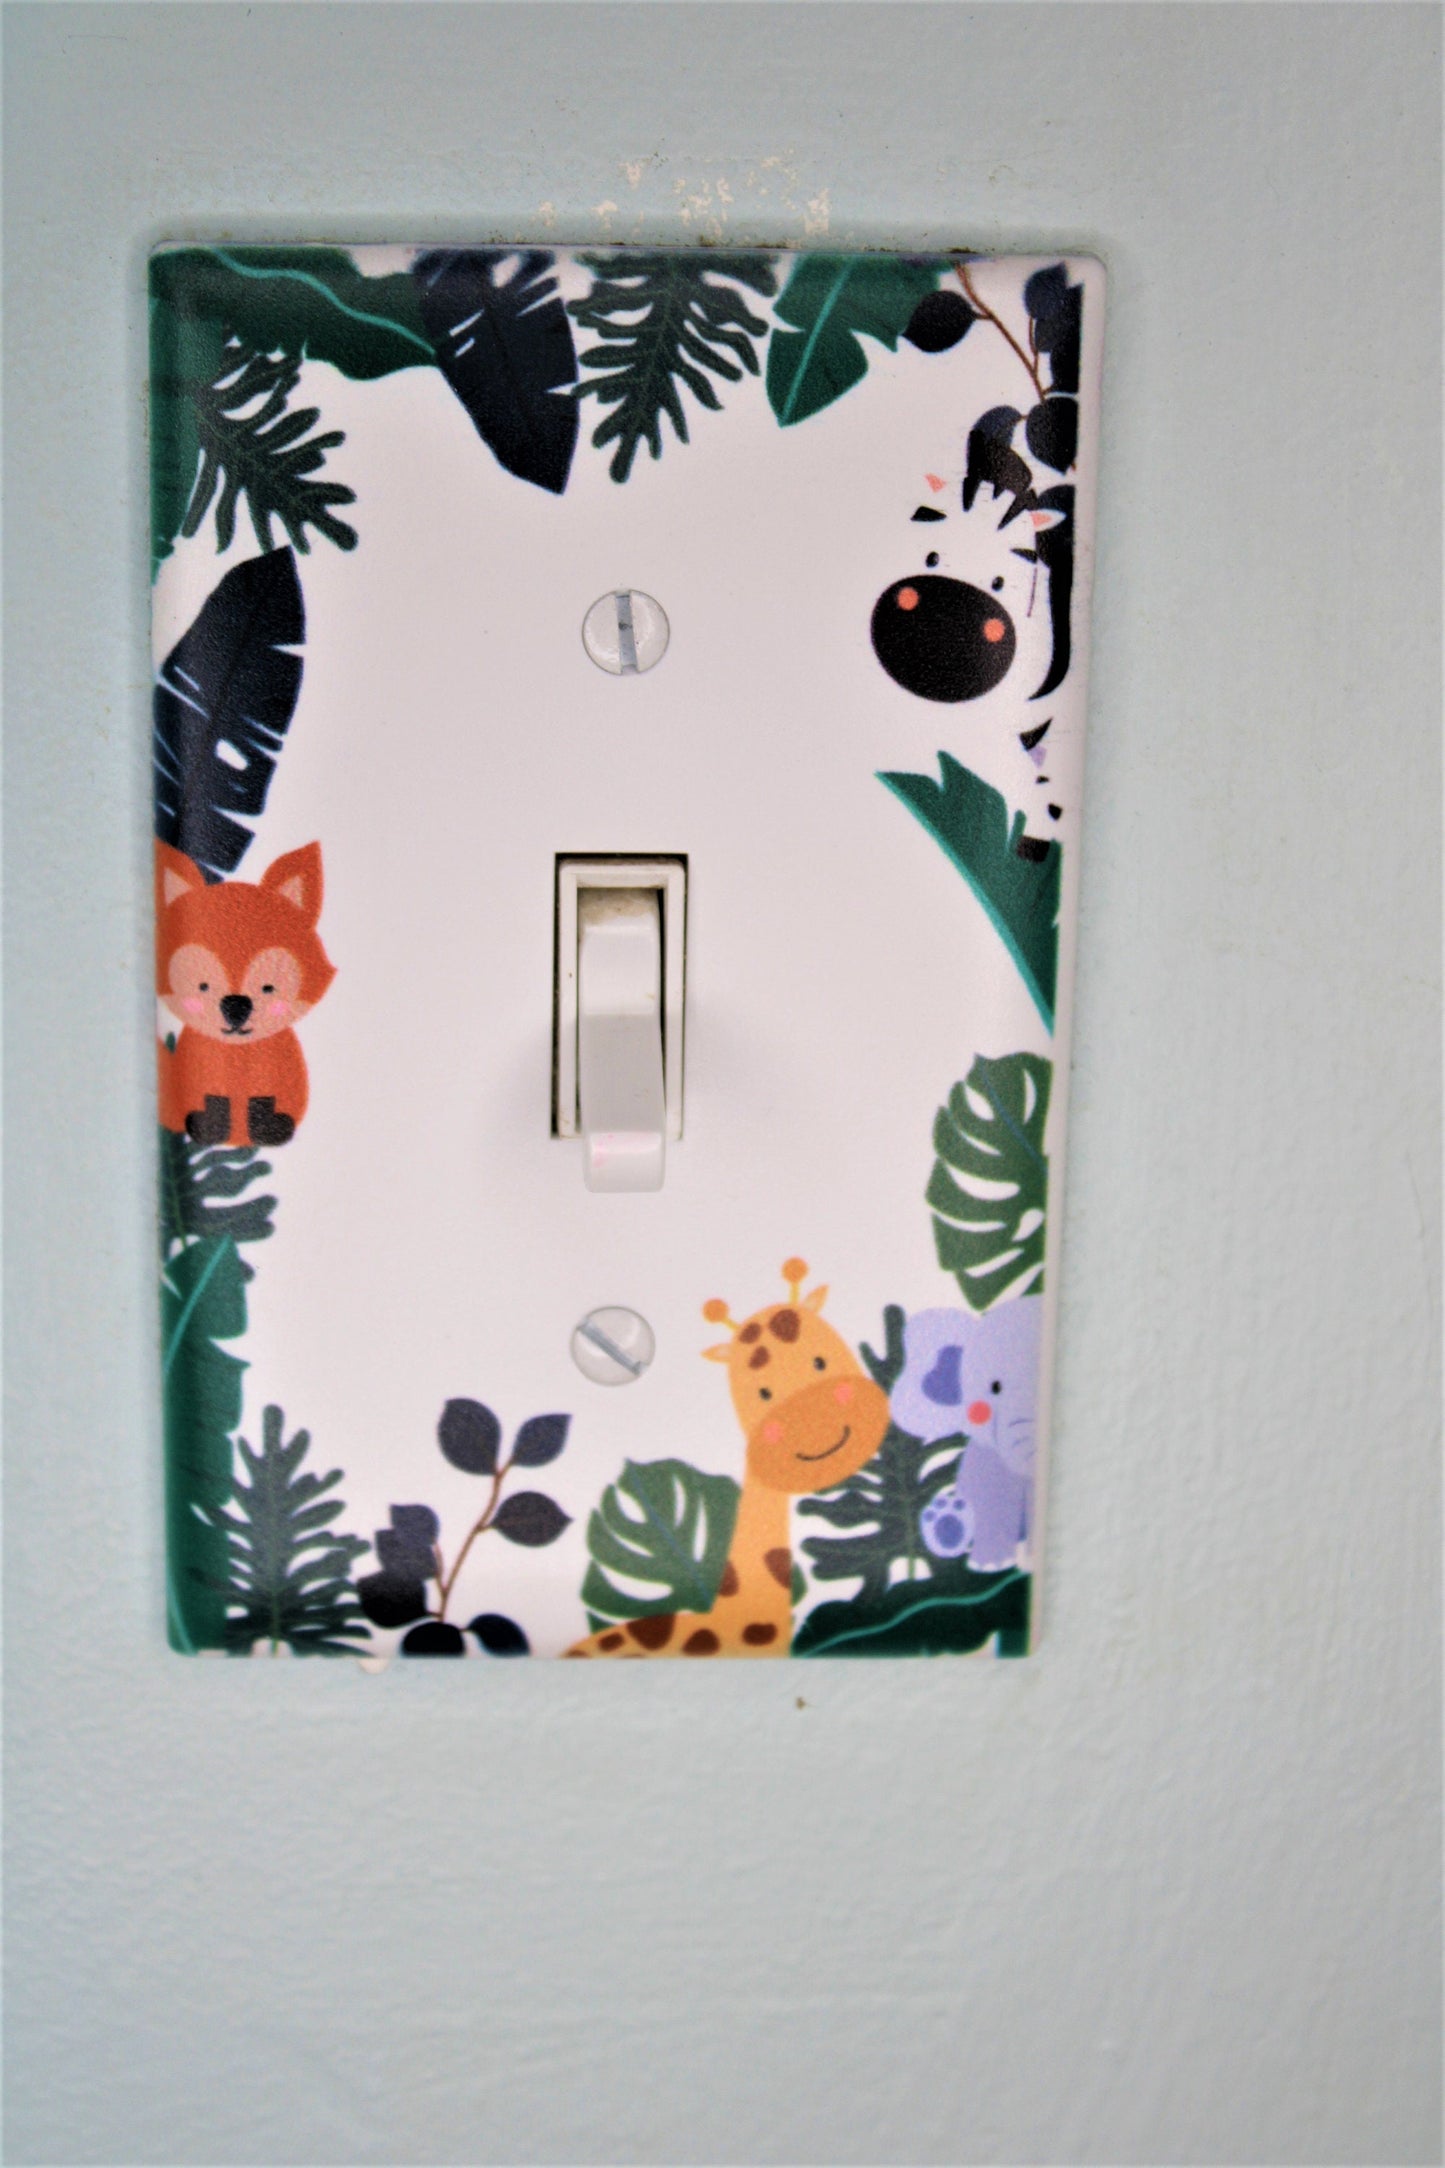 jungle cute fox zebra elephant giraffe baby durable custom printed painted light switch cover plate in color living room unique nursery